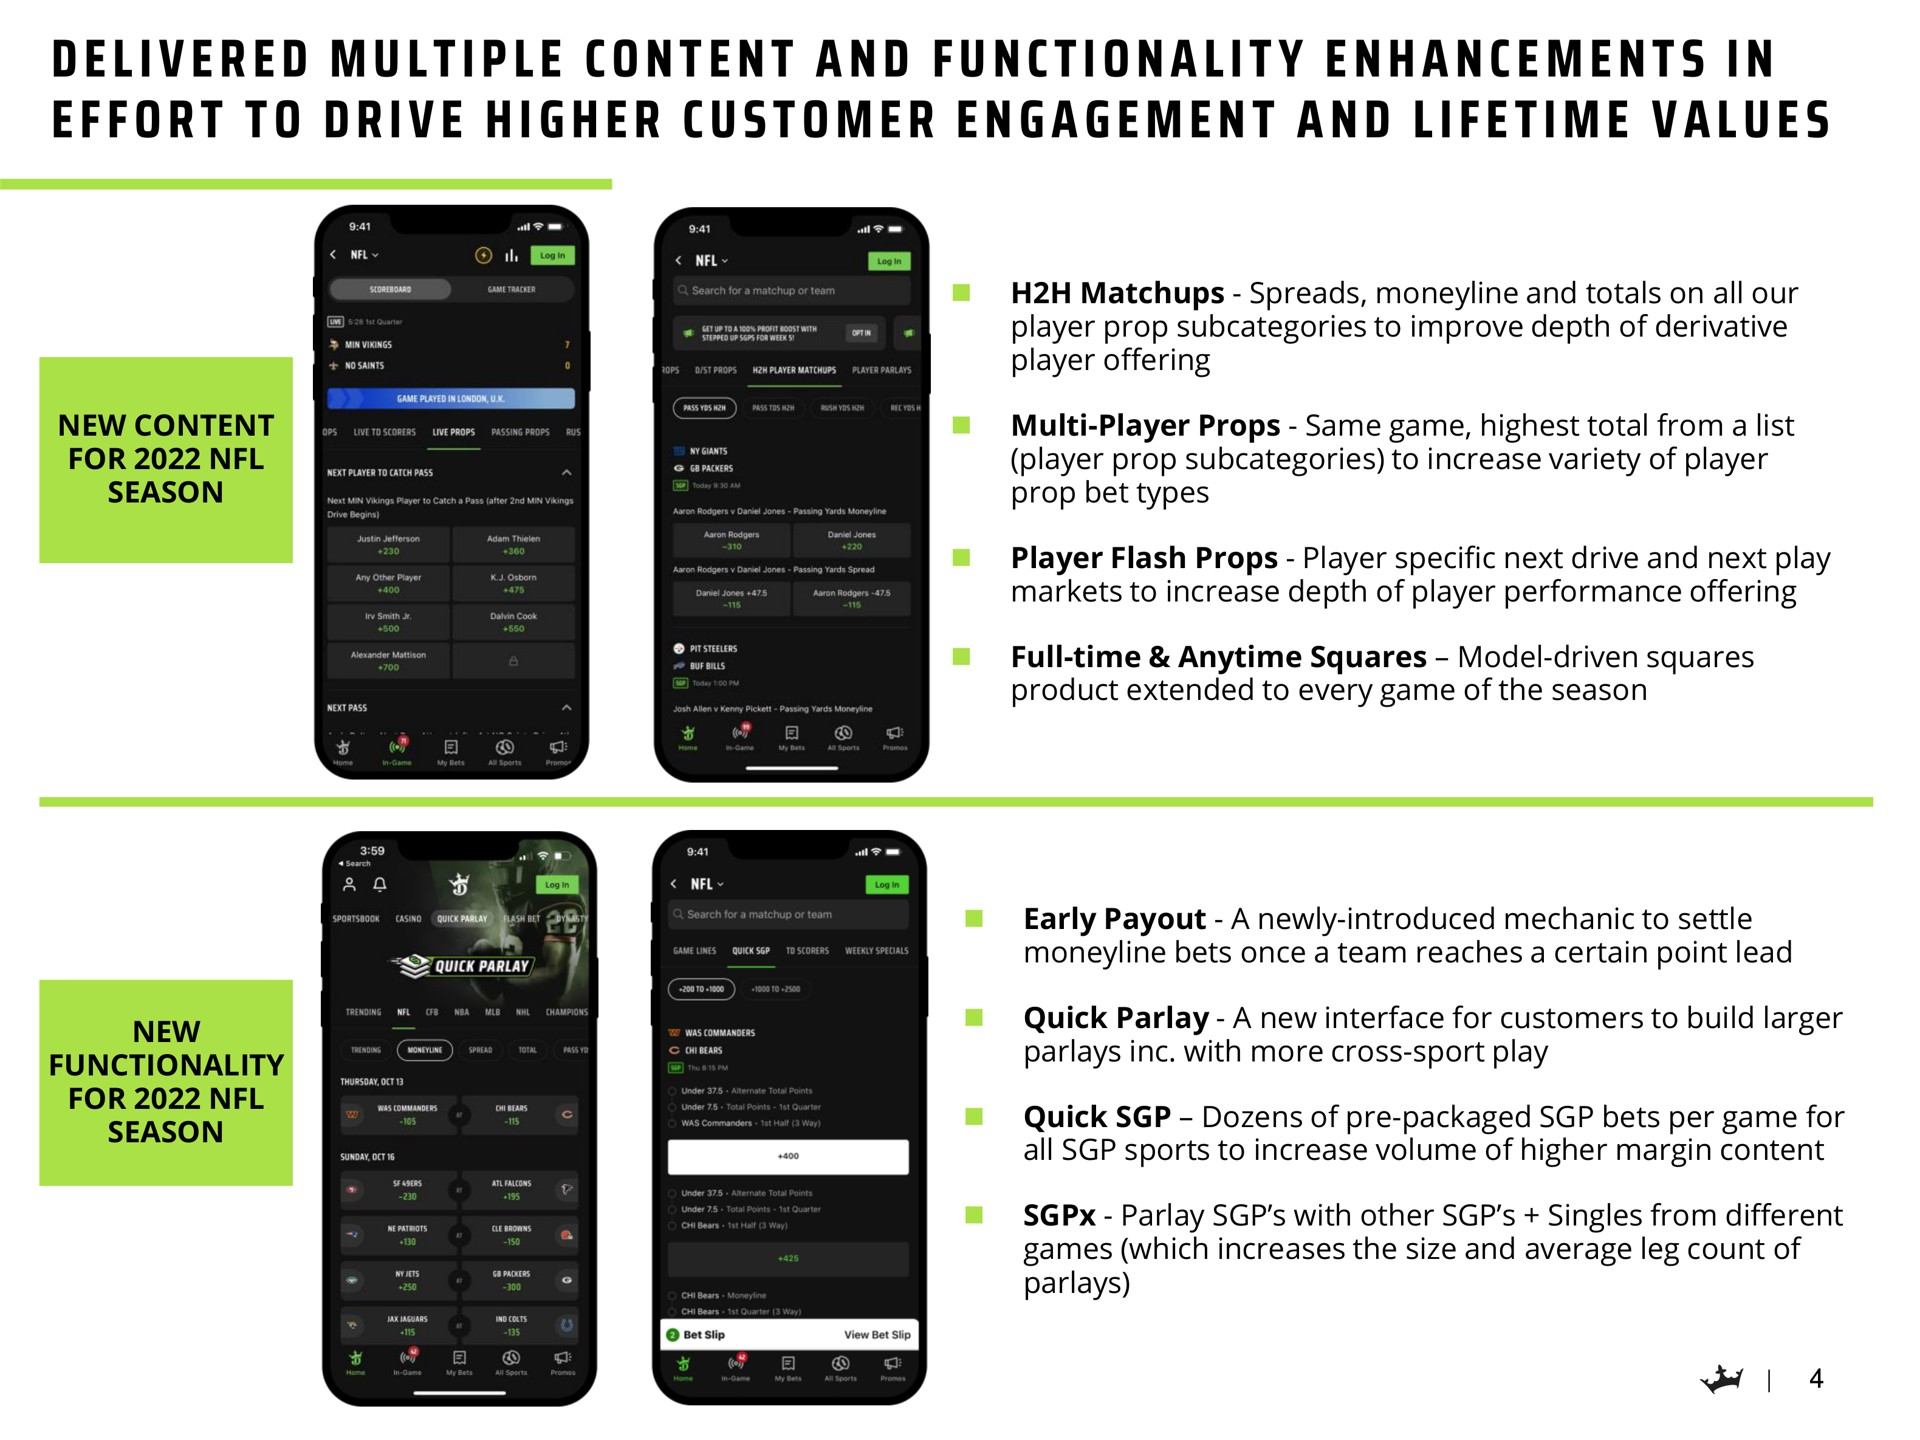 i i a i a i a i i i a a i i a delivered multiple content and functionality enhancements in effort to drive higher customer engagement and lifetime values | DraftKings